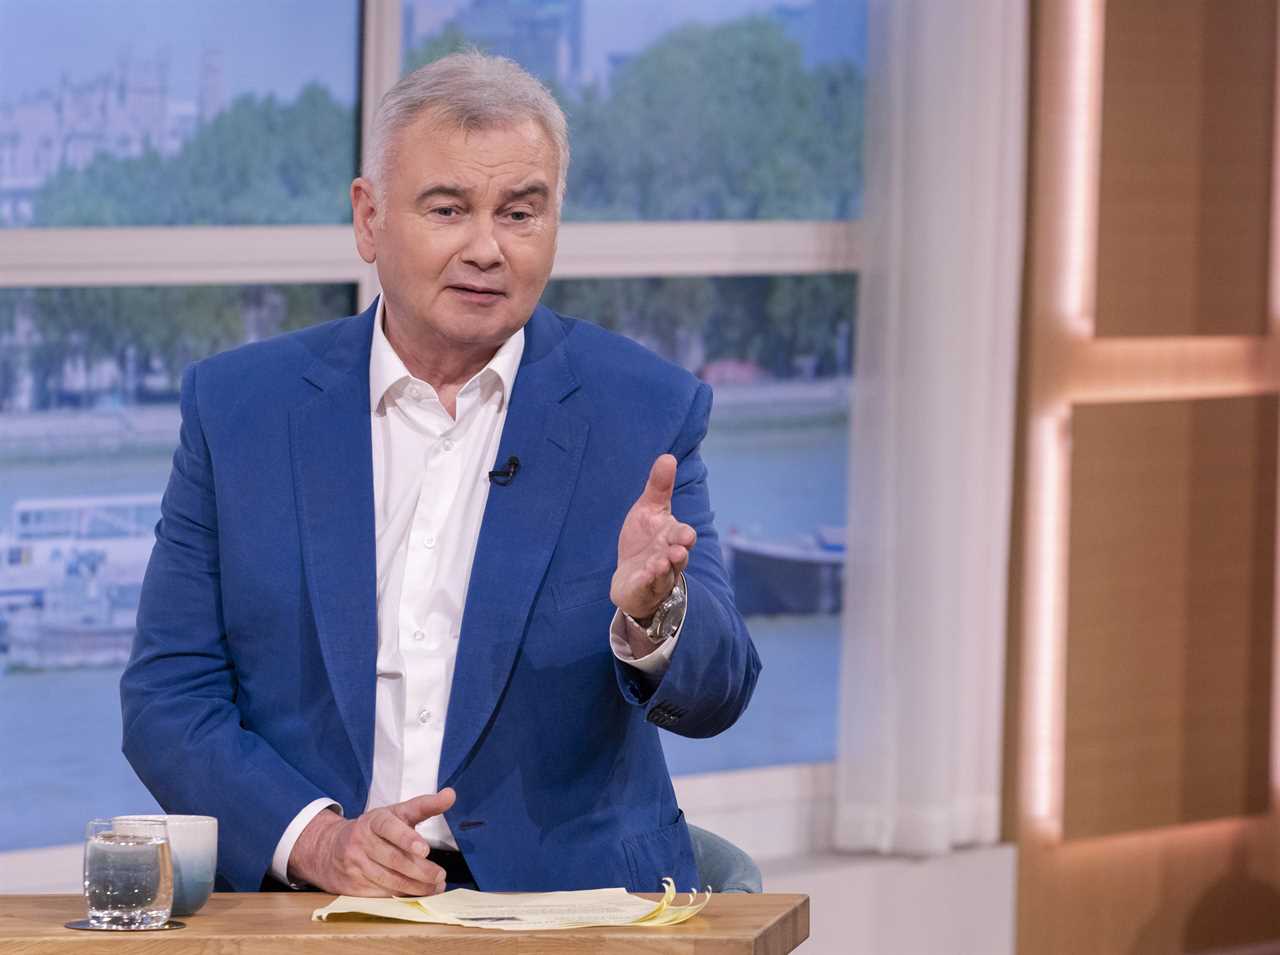 Eamonn Holmes says he felt ‘humiliated’ outside Buckingham Palace before the Queen’s funeral